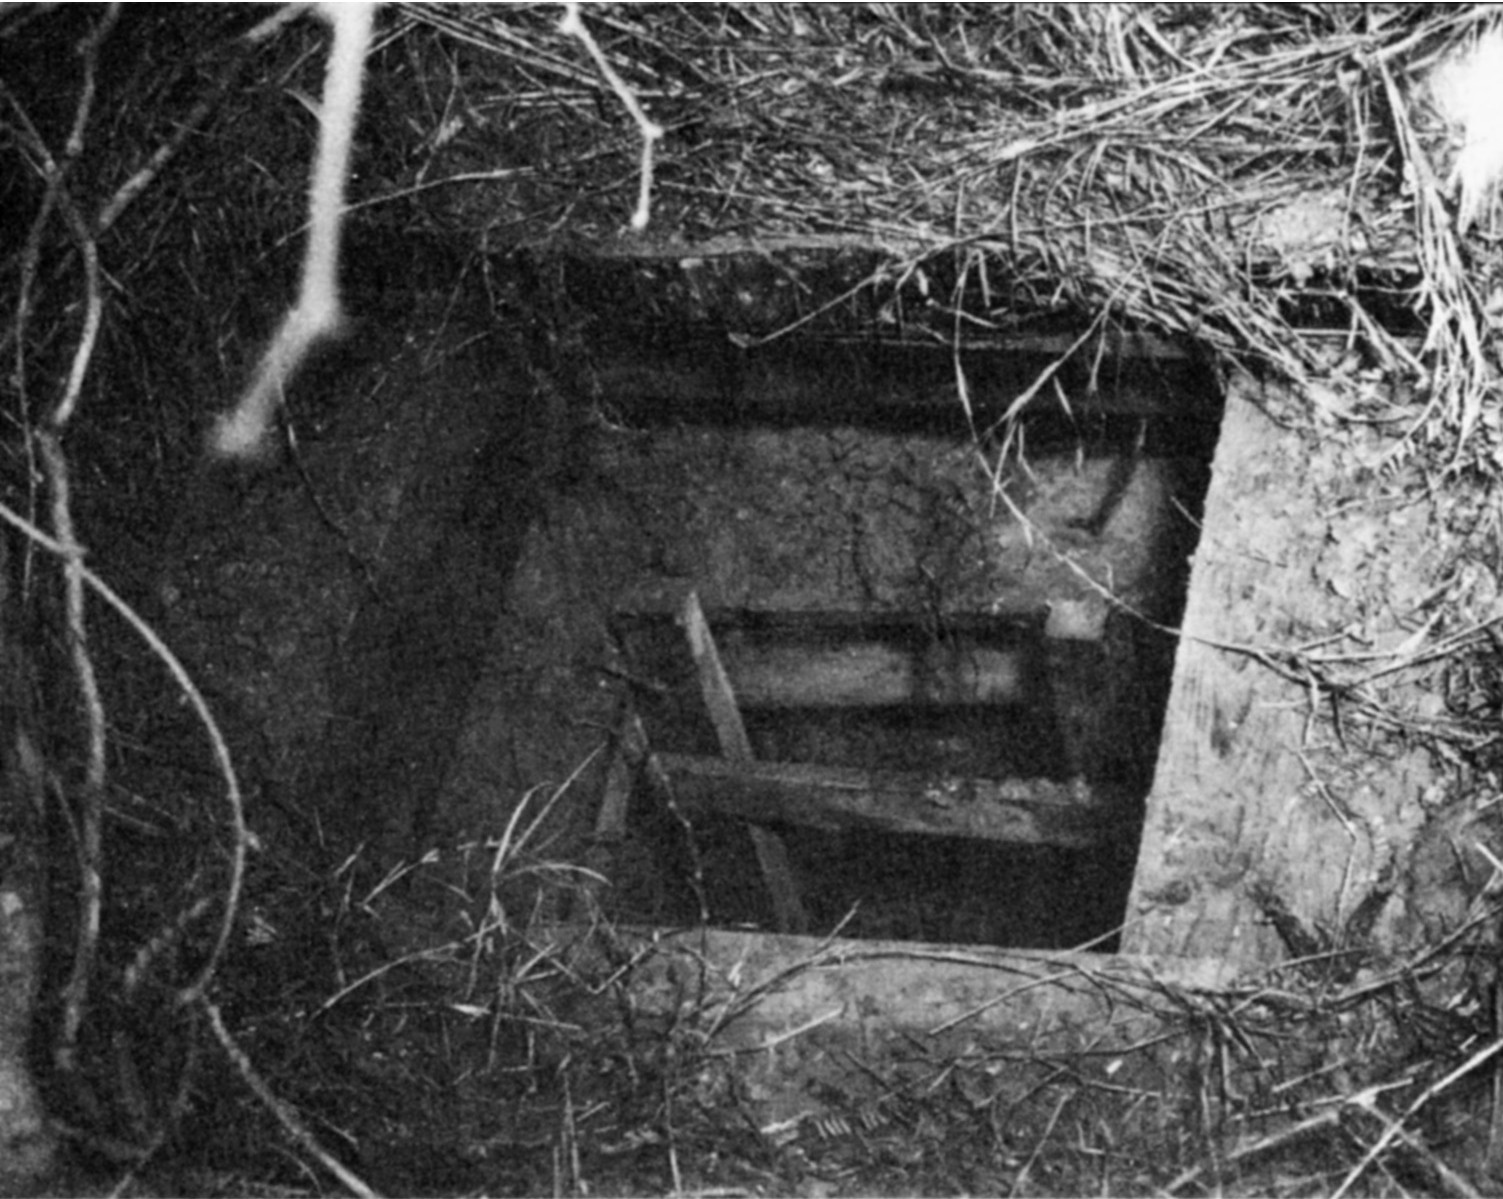 Three days after the Christmas Eve escape, the commander of the Arizona camp learned that a 175-foot escape tunnel, entrance above, had been dug over a period of several months. (National Archives)